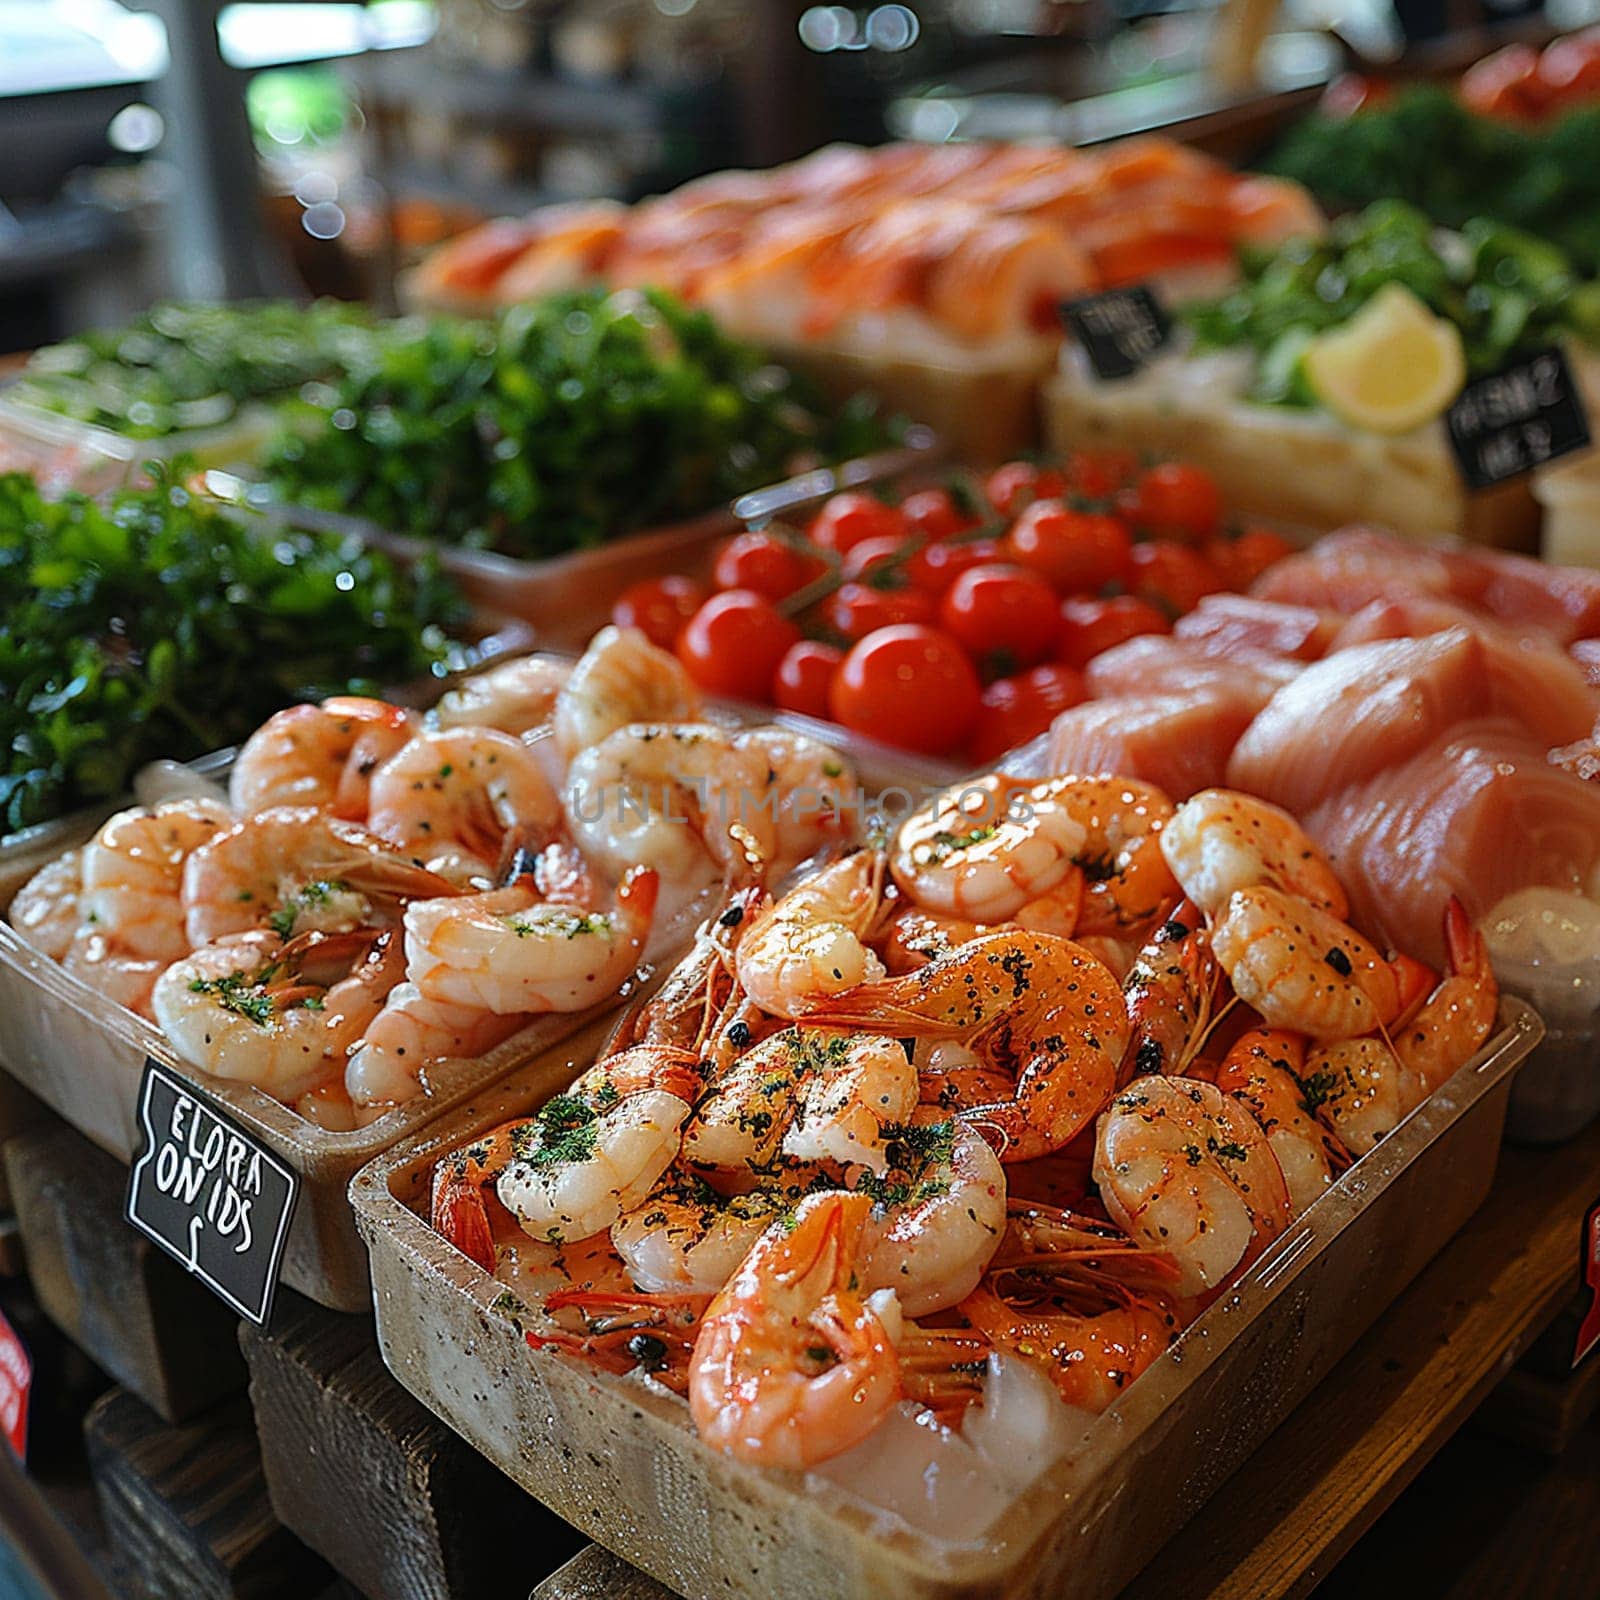 Fresh Seafood Market Nets Ocean Bounty in Business of Fishmongery, Ice beds and fresh catches reel in a story of ocean flavors and market freshness in the seafood business.